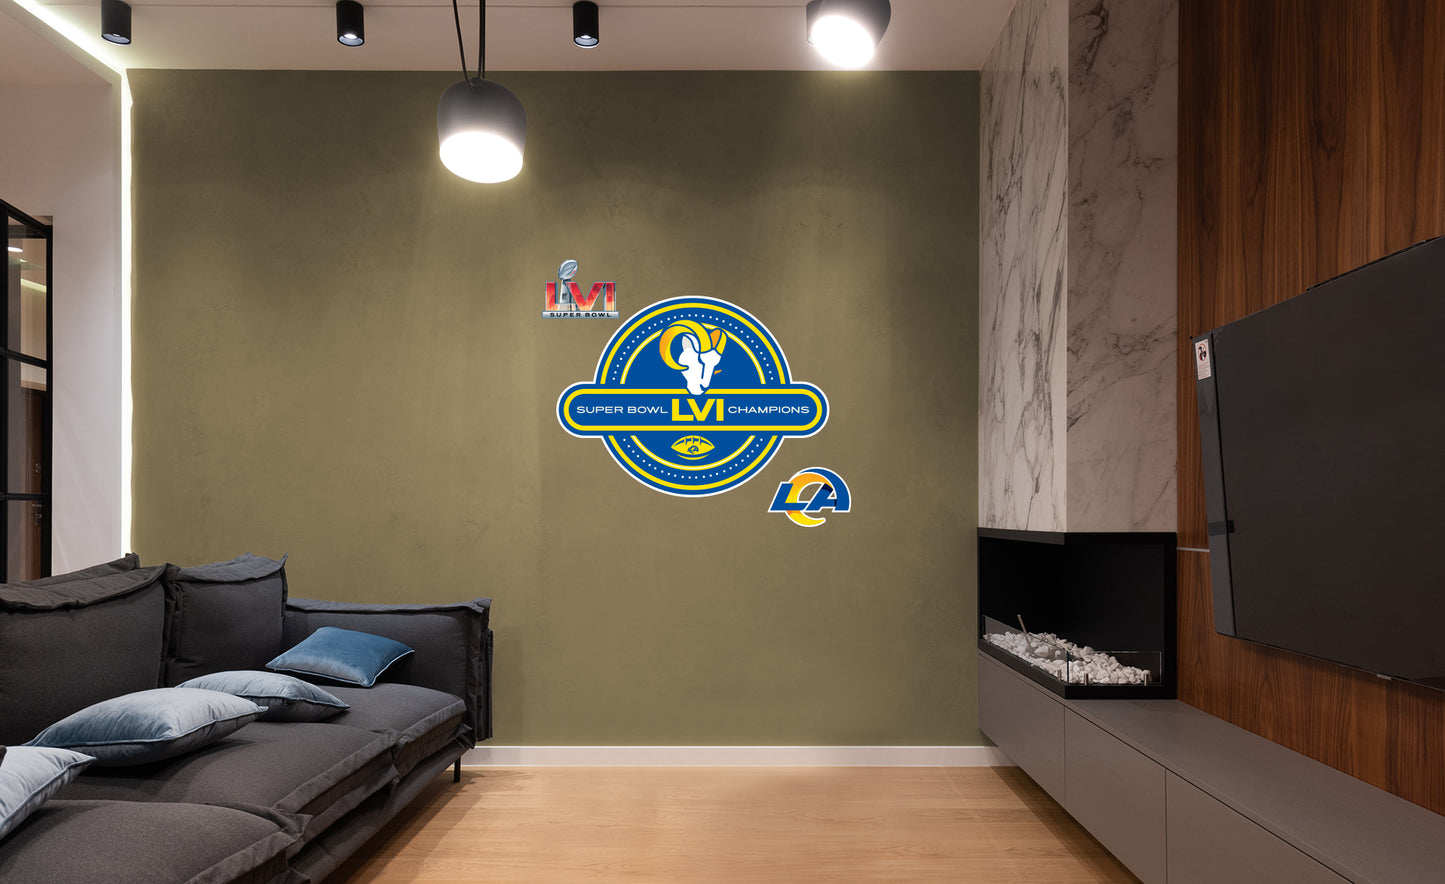 Los Angeles Rams: Super Bowl LVI Champions Logo - Officially Licensed NFL Removable Adhesive Decal